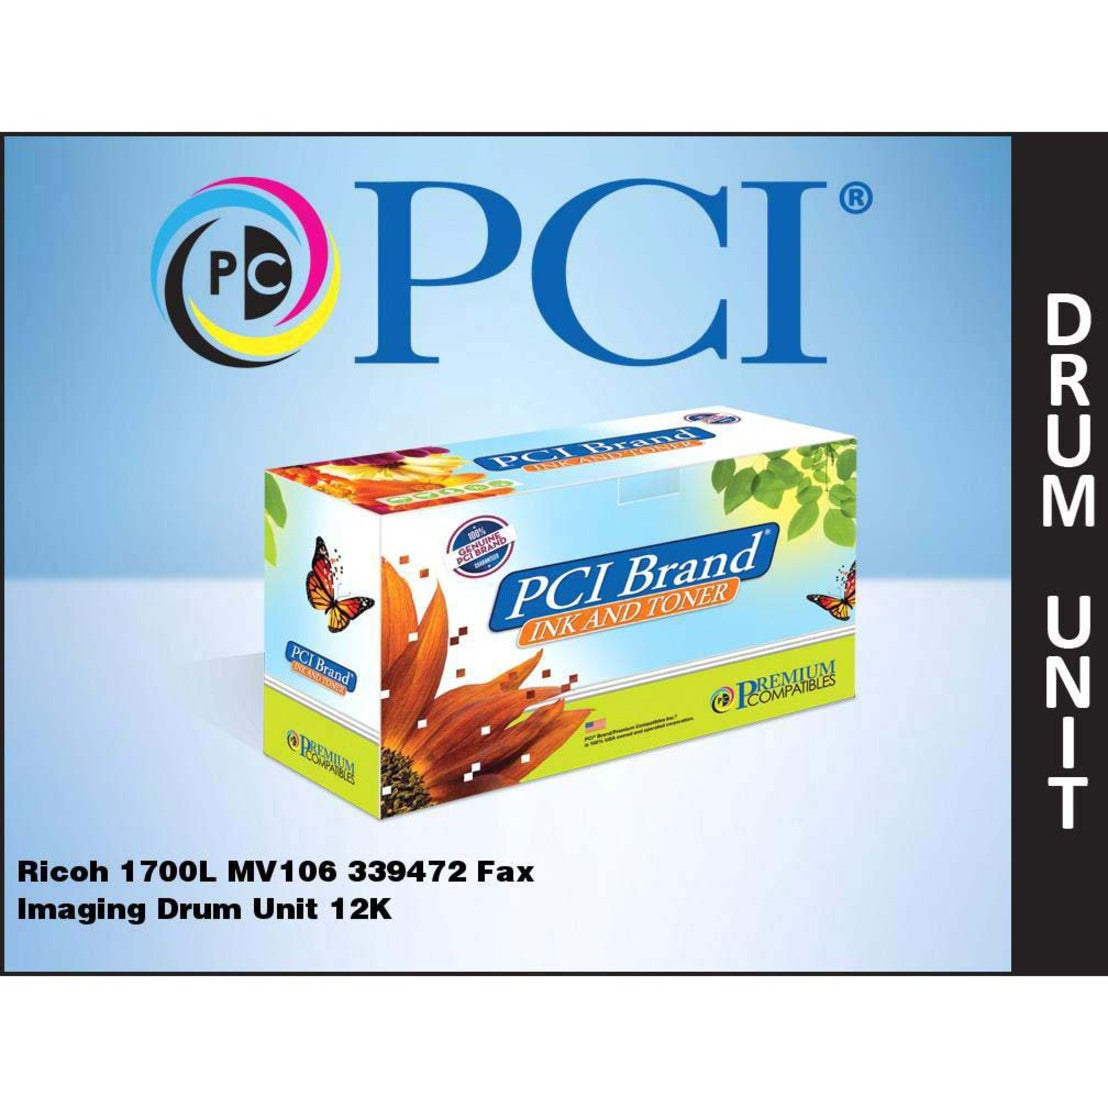 Premium Compatibles Ricoh 339472 1700L MV106 Fax Drum Unit 12K Yield Made in the USA for 9766